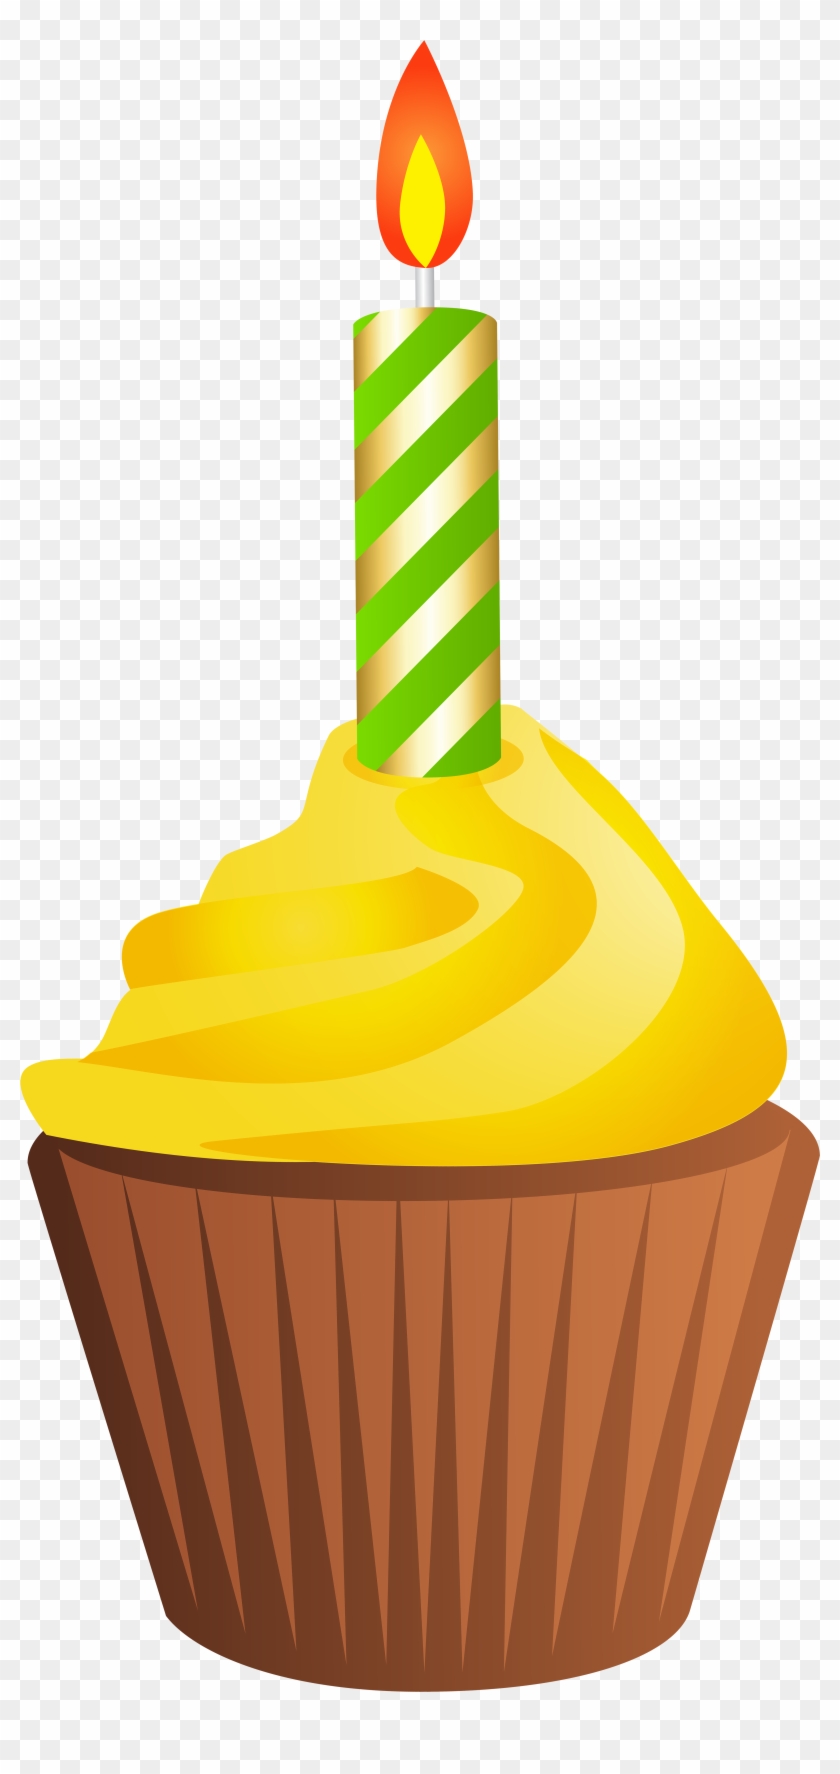 Birthday Muffin With Candle Png Clip Art Imageu200b - Png Format Birthday Candle Png #47881